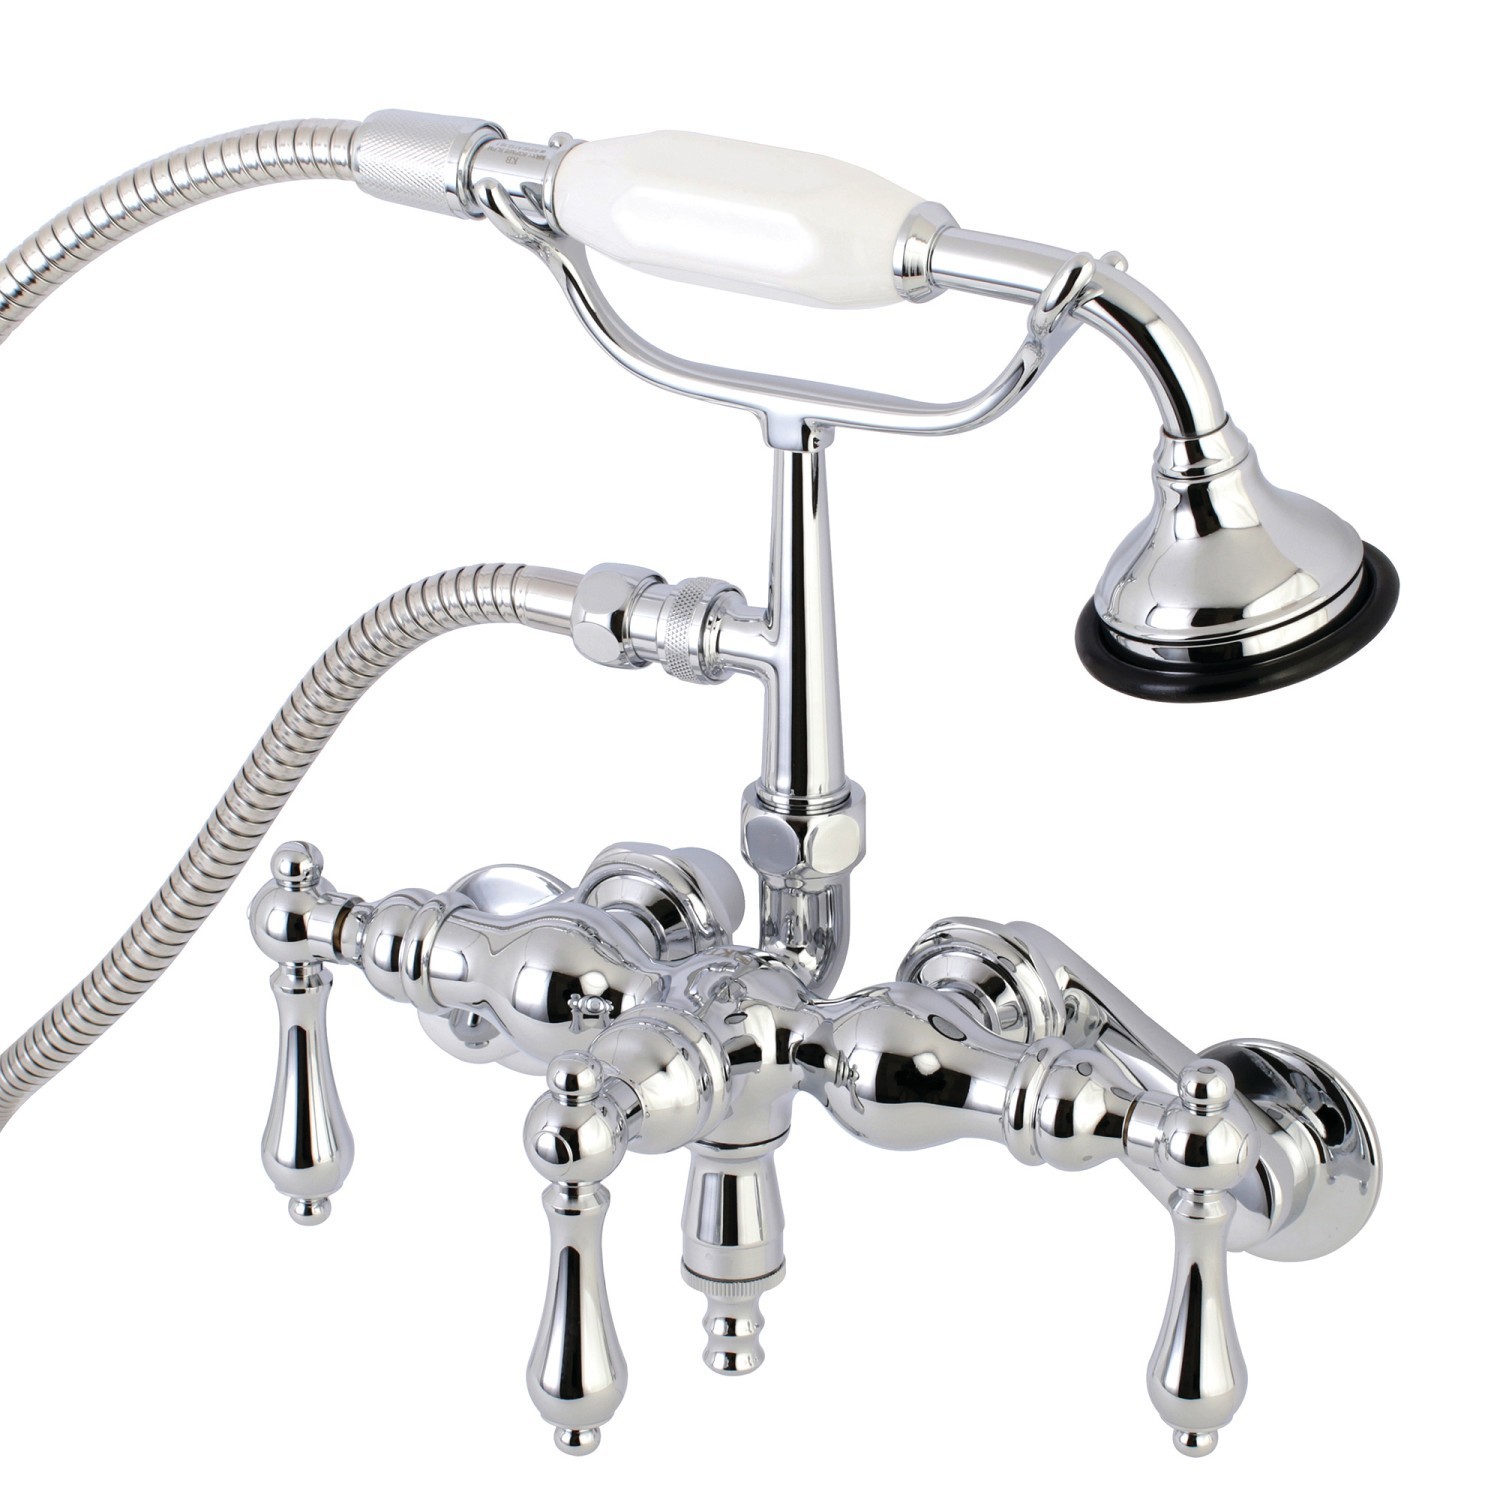 KINGSTON BRASS AE4T VINTAGE CLAWFOOT TUB FAUCET WITH HAND SHOWER